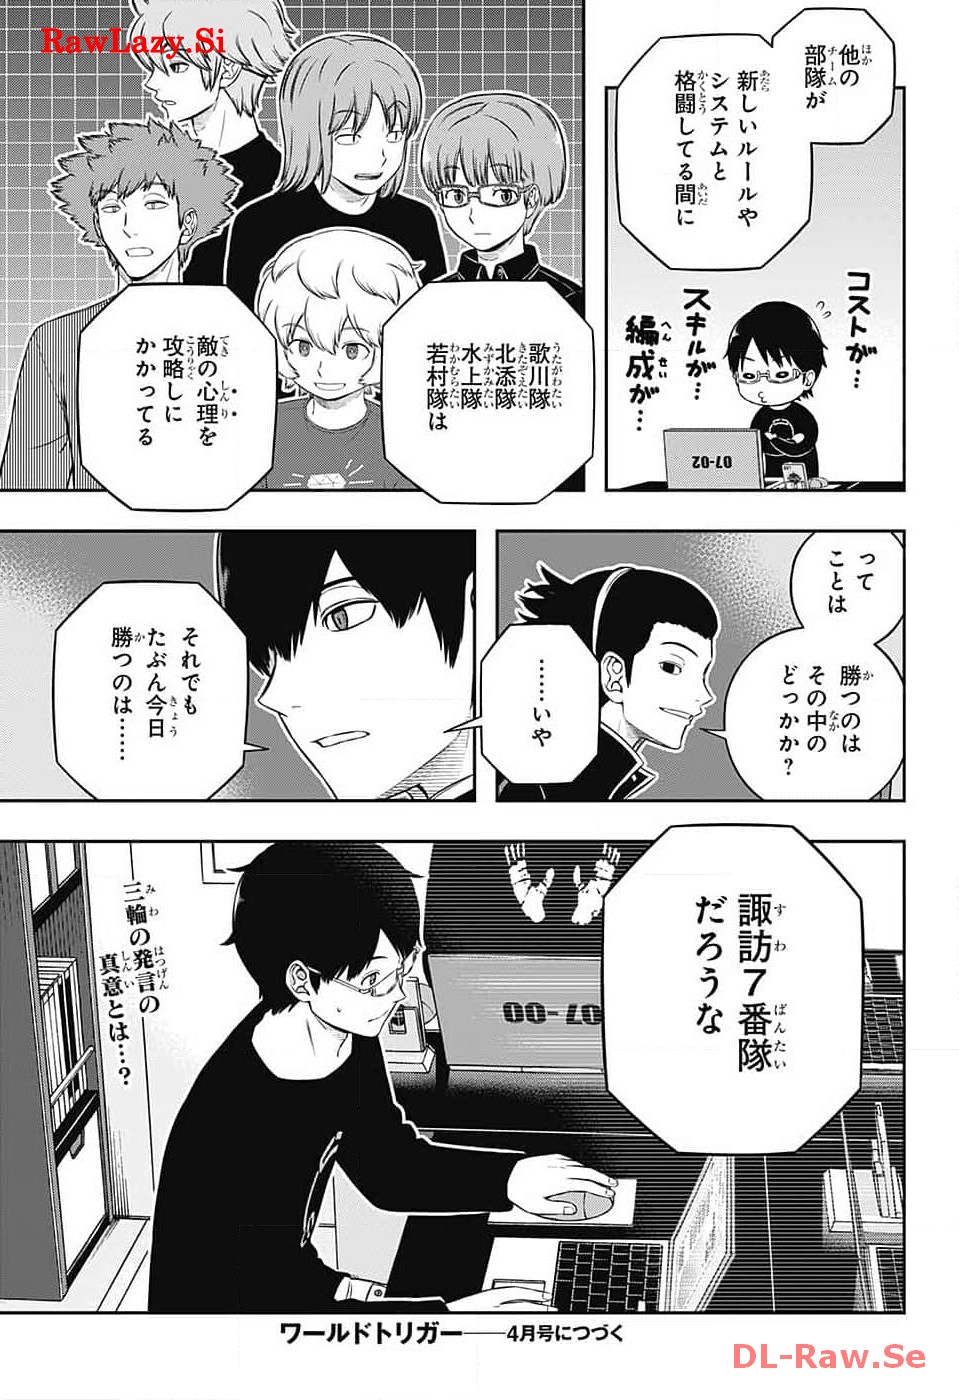 World Trigger - Chapter 239 - Page 37